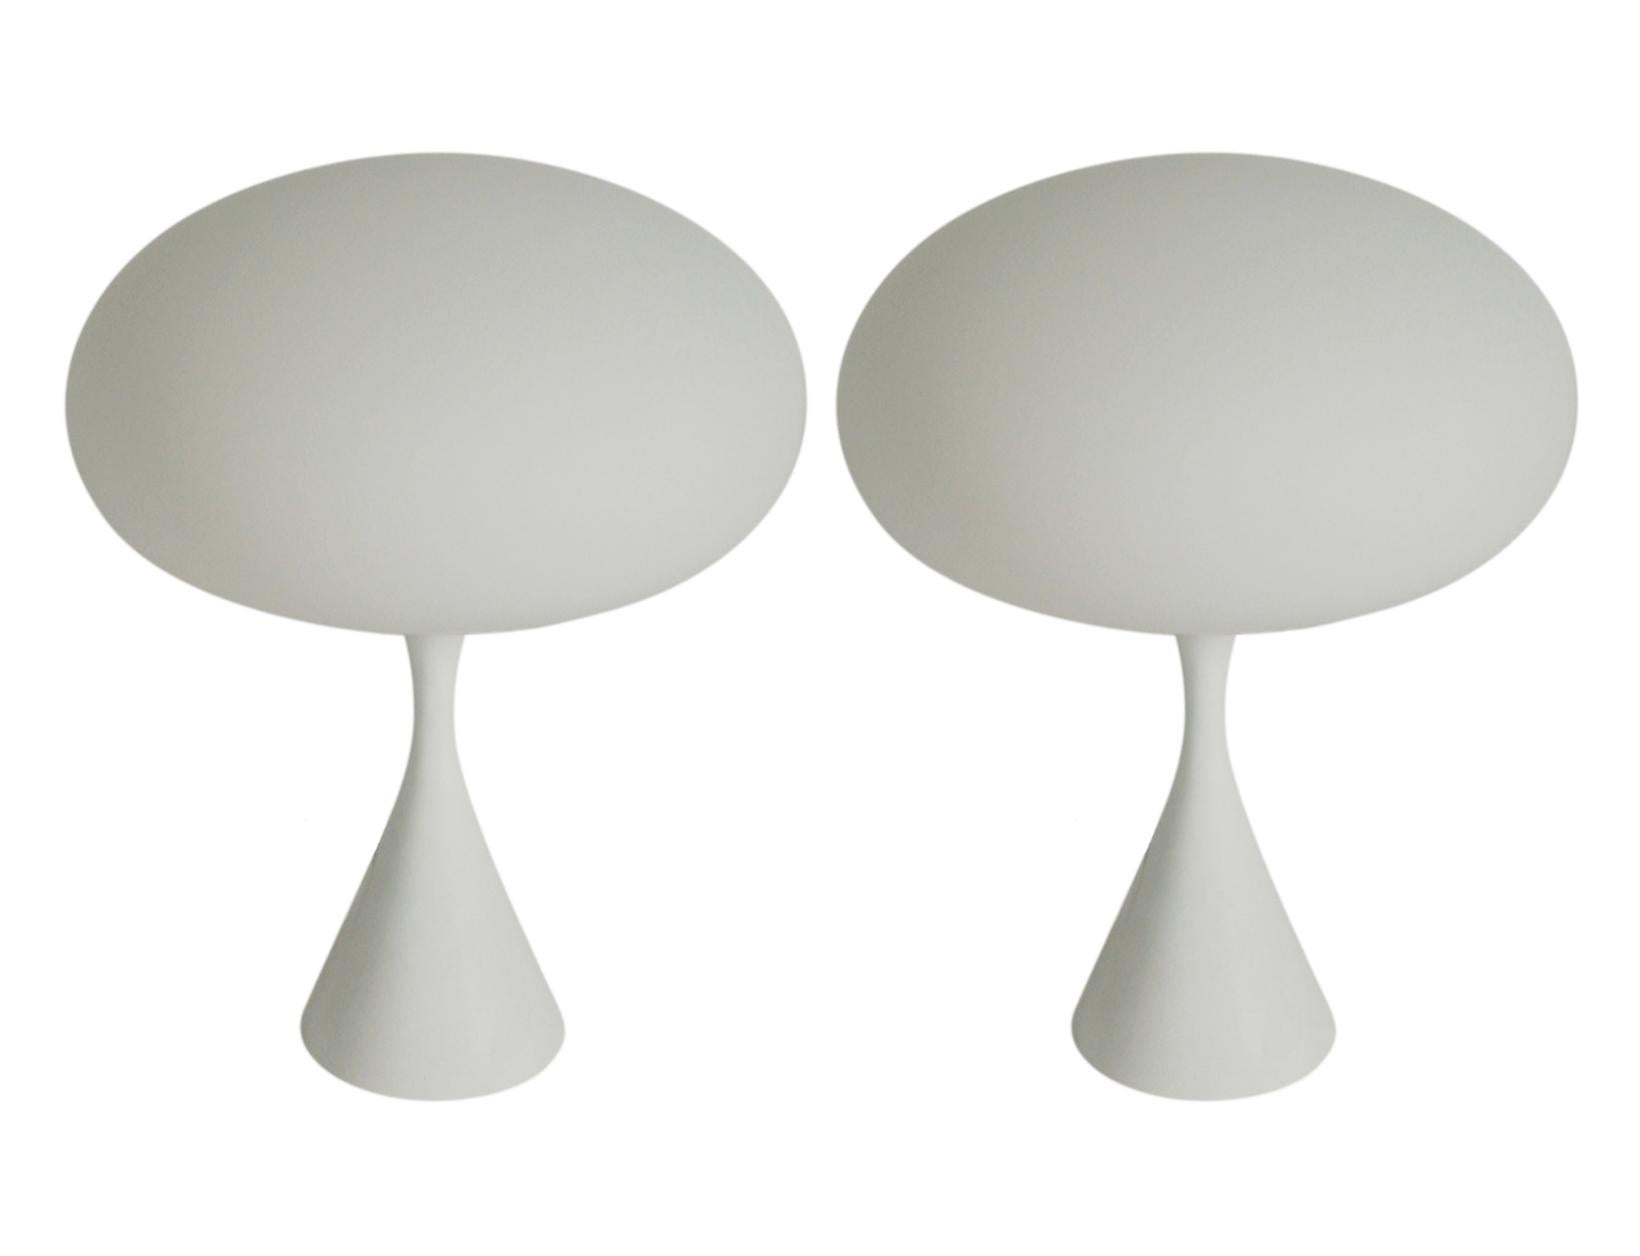 Indian Pair of Mid-Century Modern Table Lamps by Designline in White on White Glass For Sale